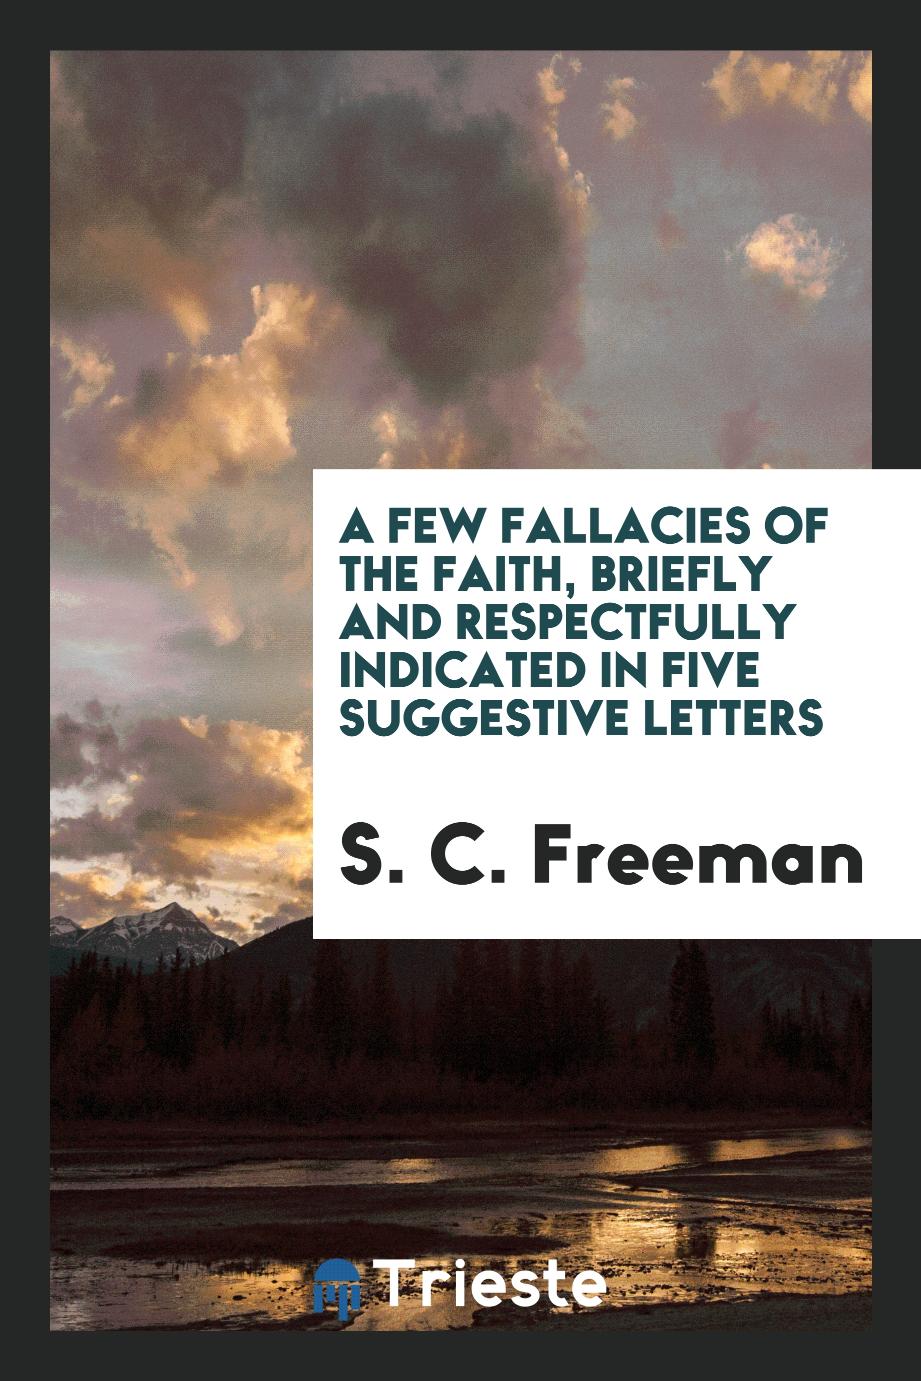 A Few Fallacies of the Faith, Briefly and Respectfully Indicated in Five Suggestive Letters